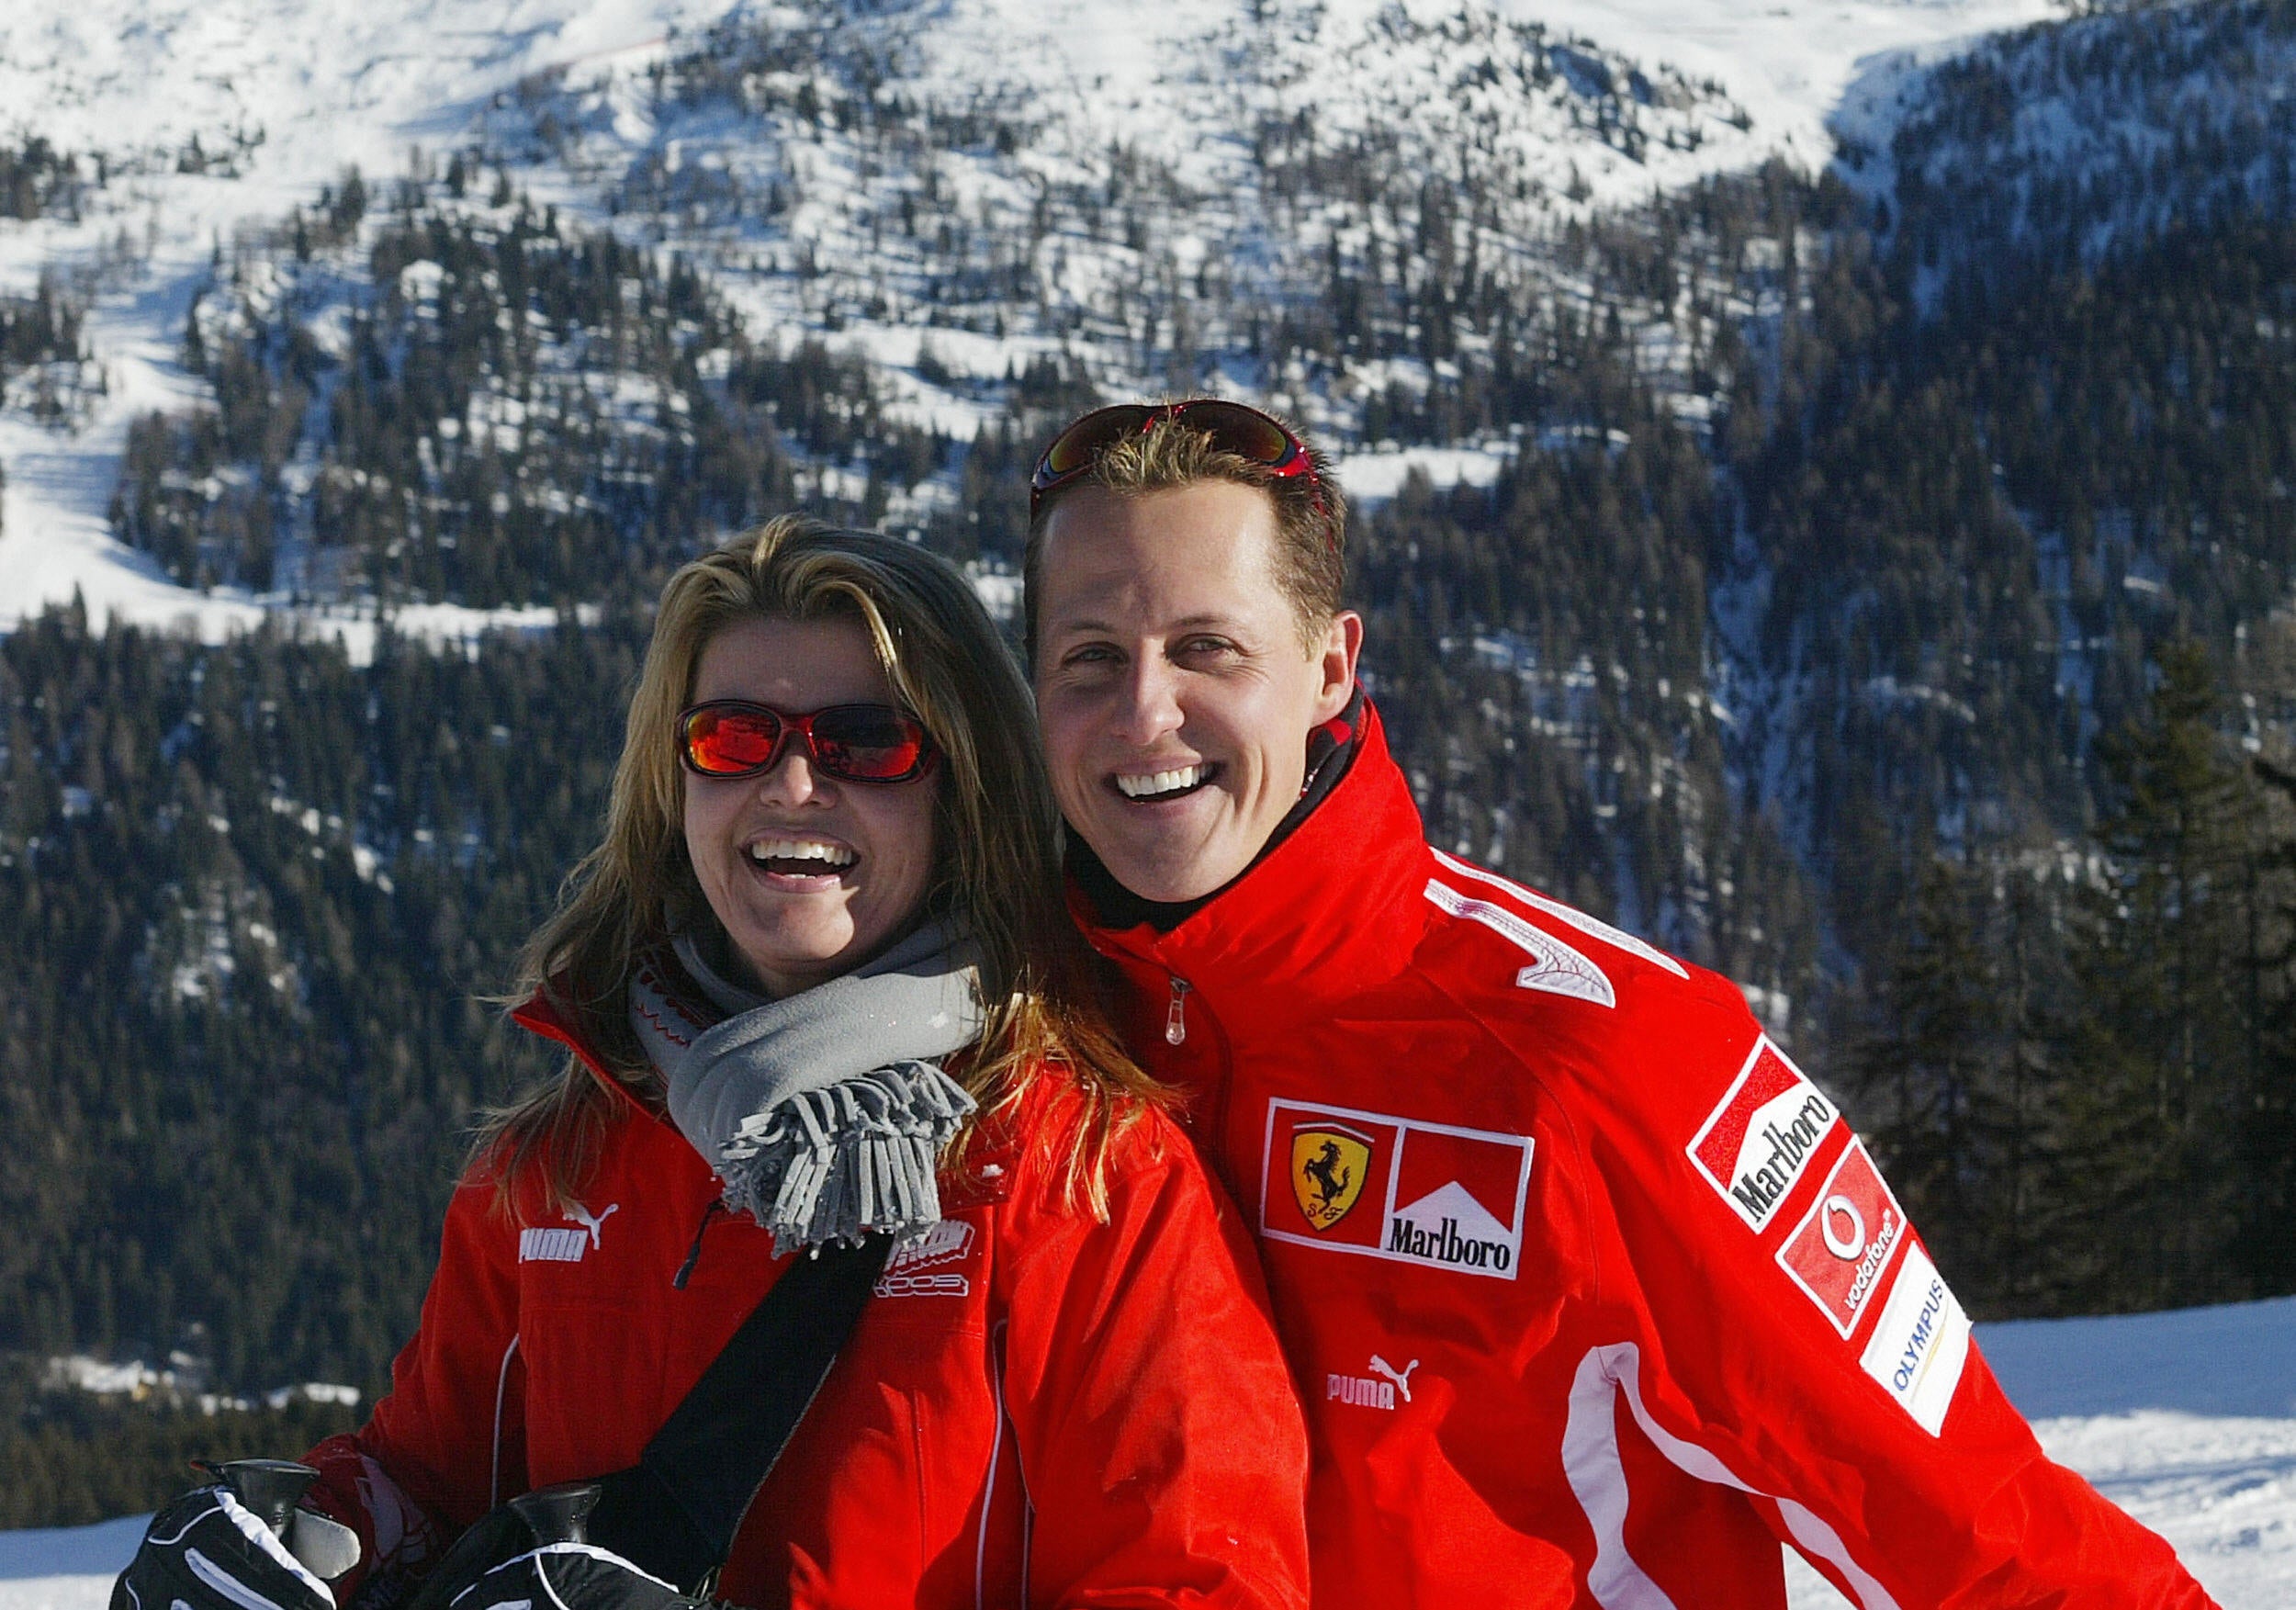 Schumacher’s wife Corinna has insisted on protecting her husband’s privacy